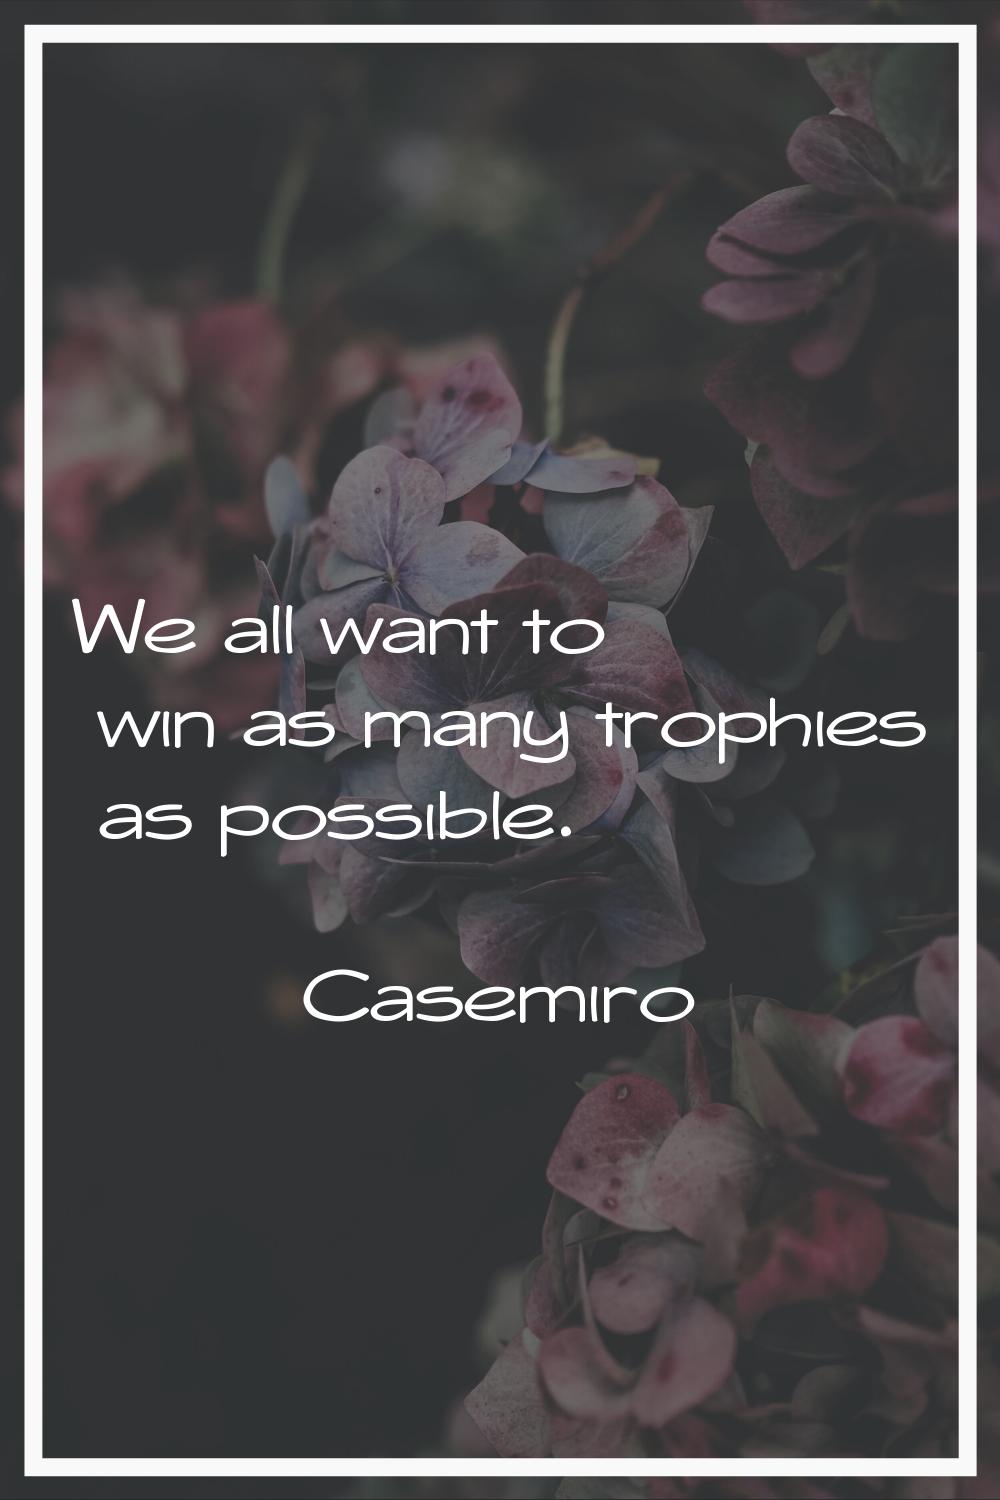 We all want to win as many trophies as possible.